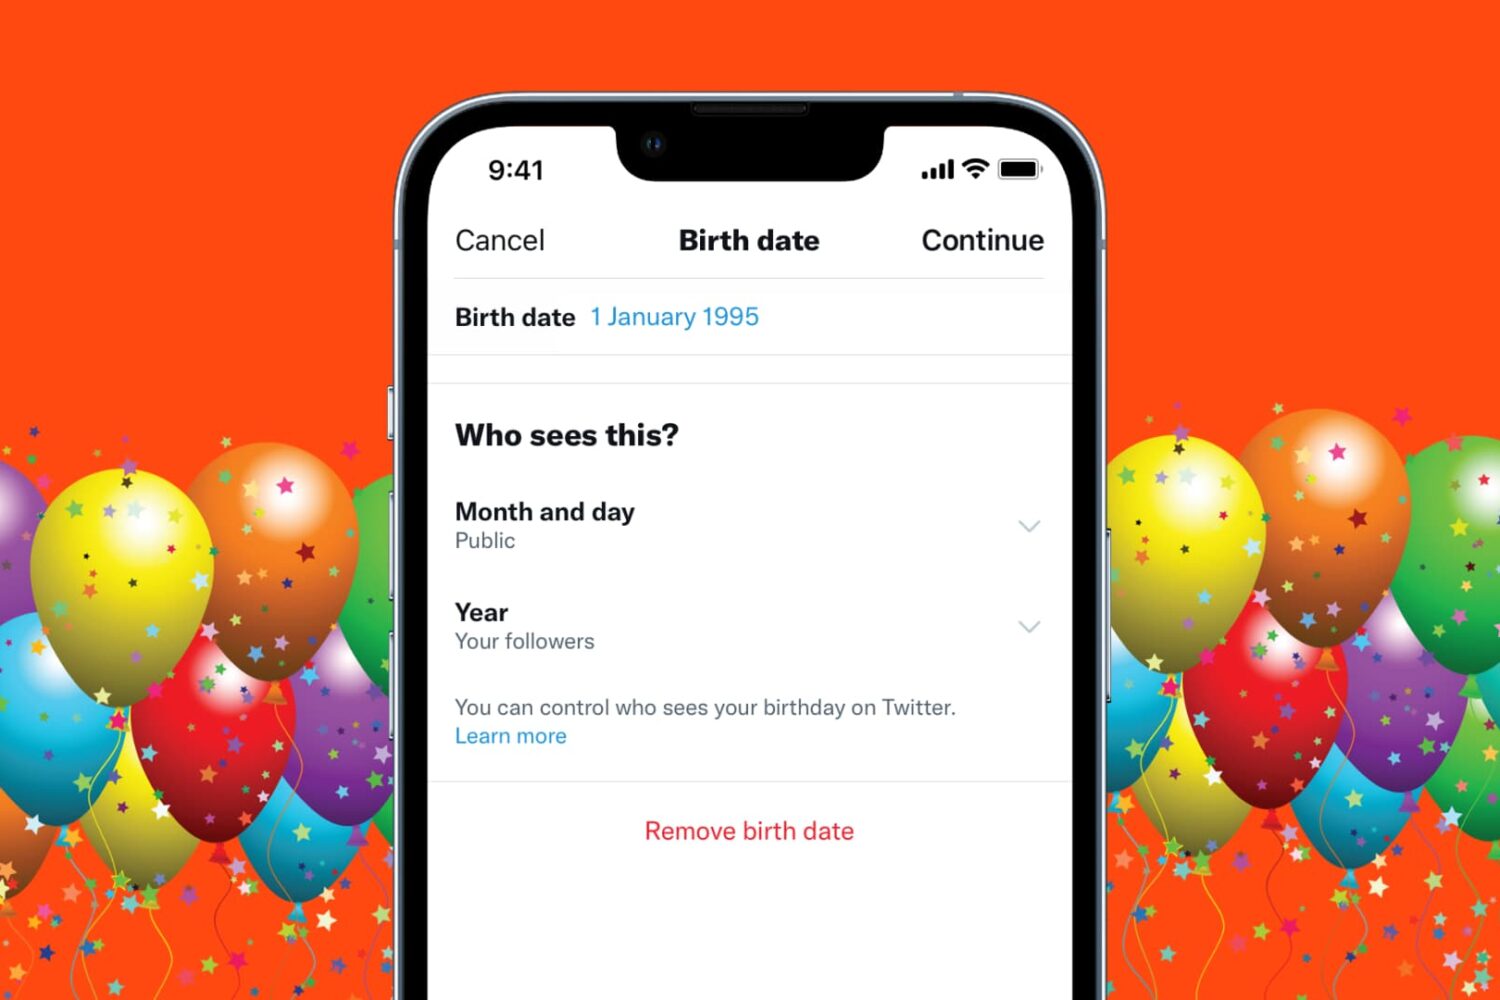 Remove your birthday from Twitter